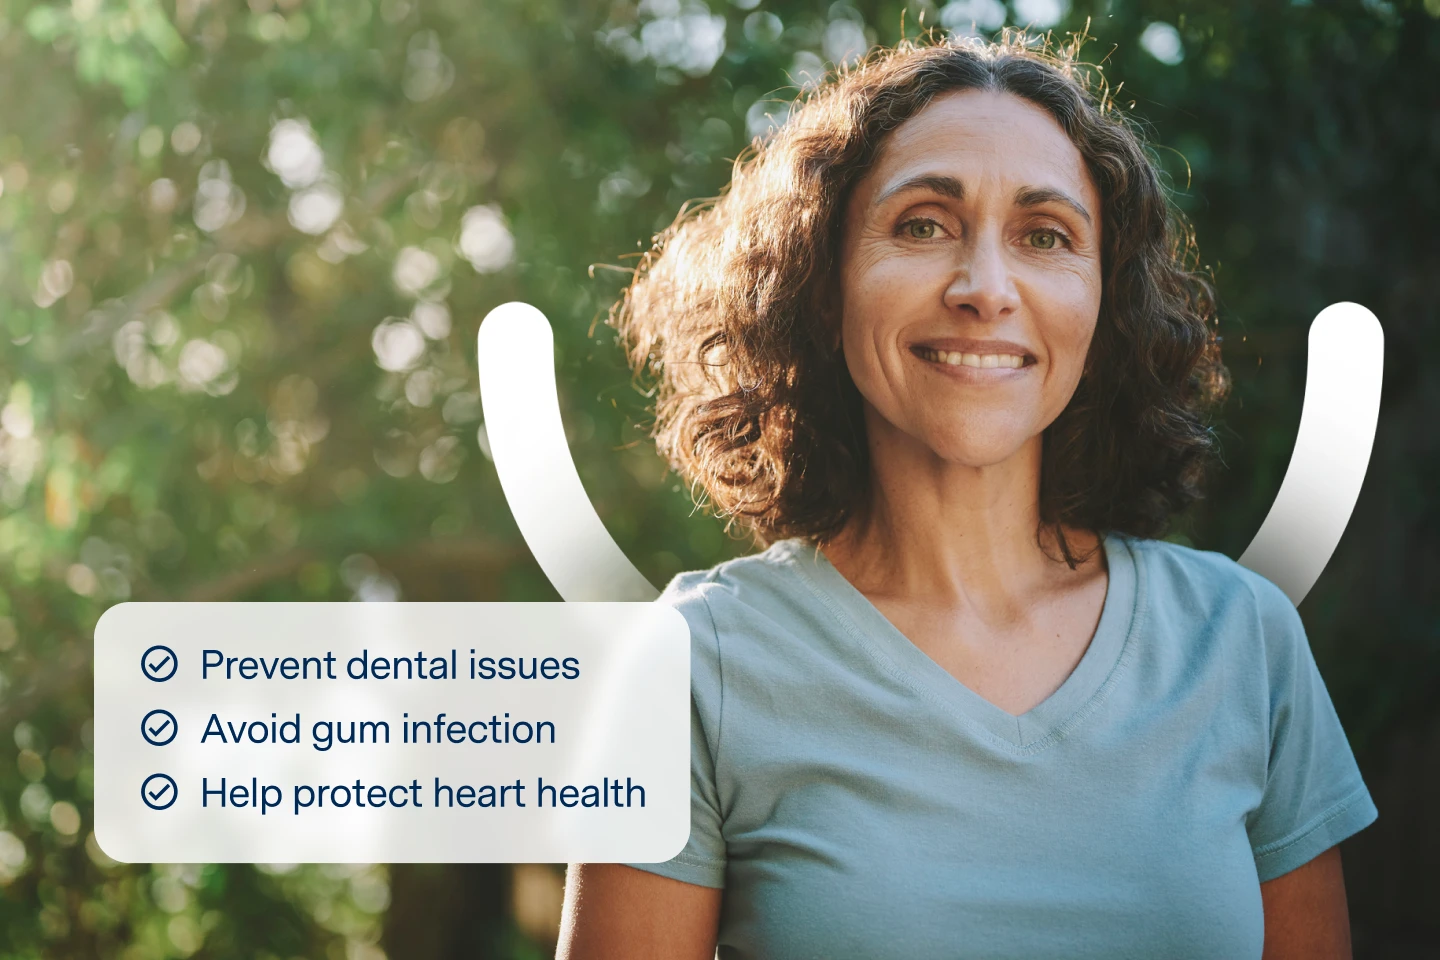 Maintaining your oral health is important as it:
Prevents dental issues
Avoid gum infections
Helps protect heart health